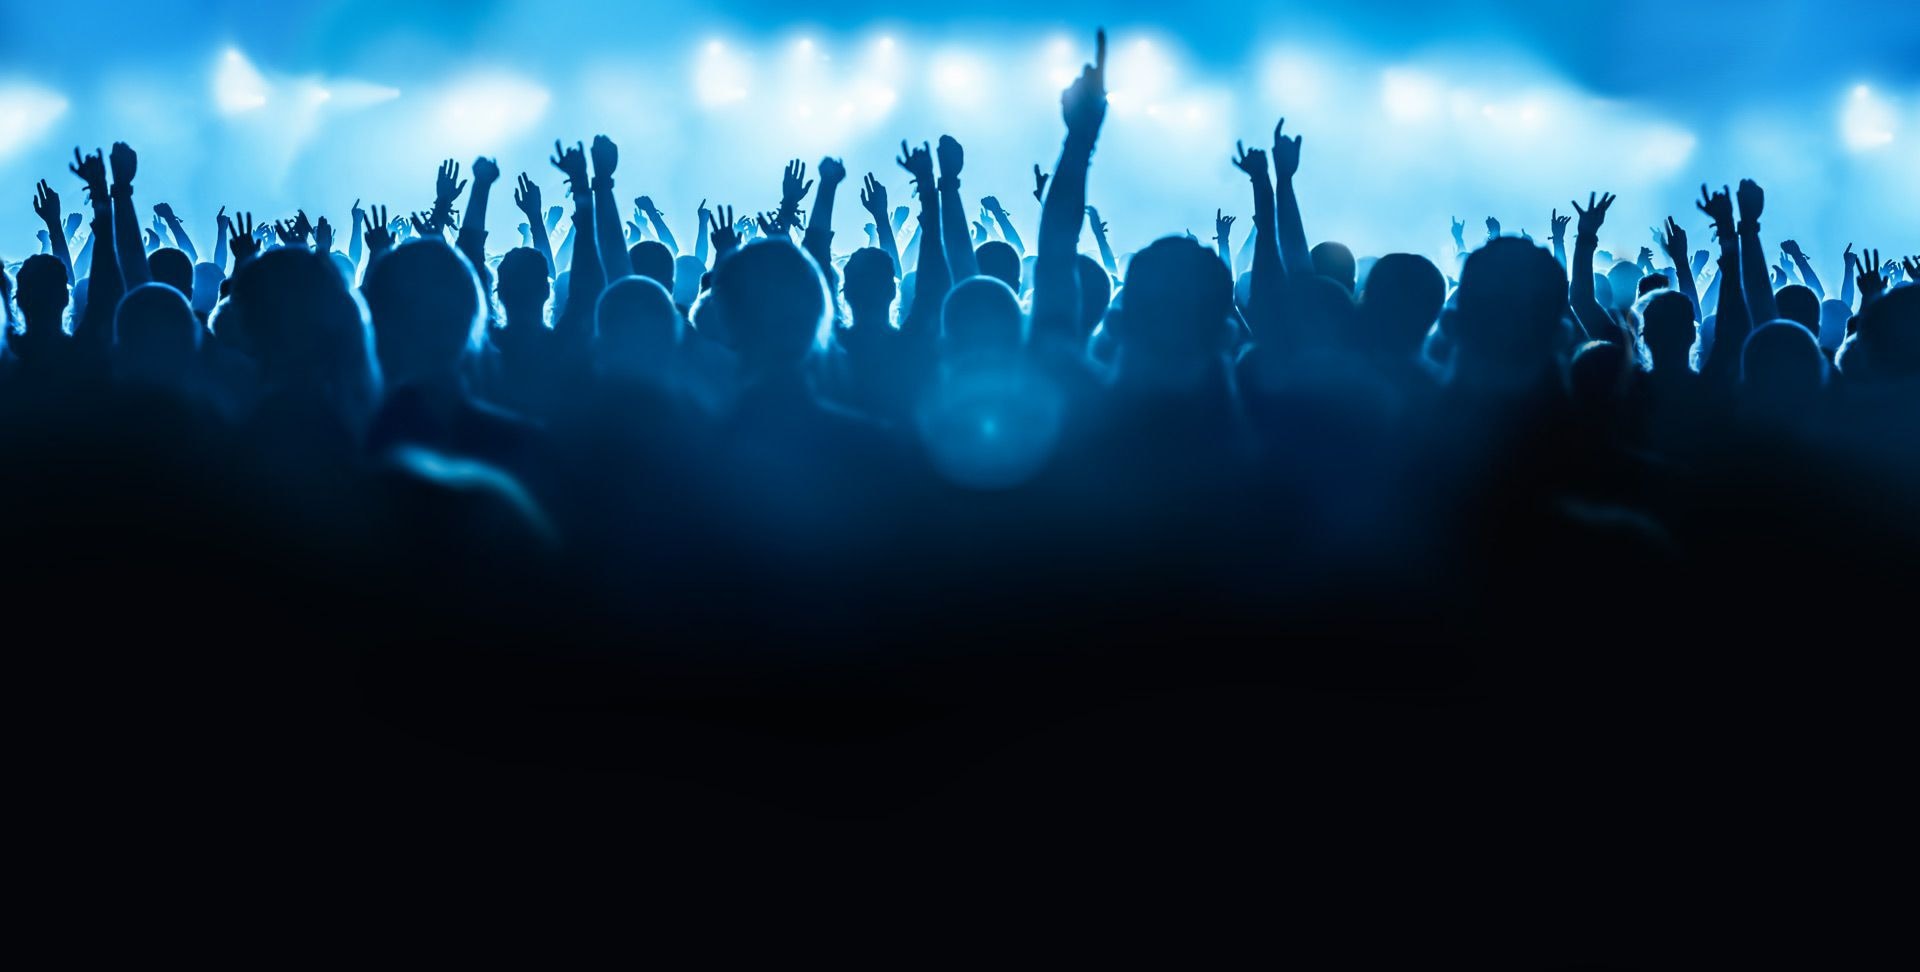 Background image of the crowd at a concert